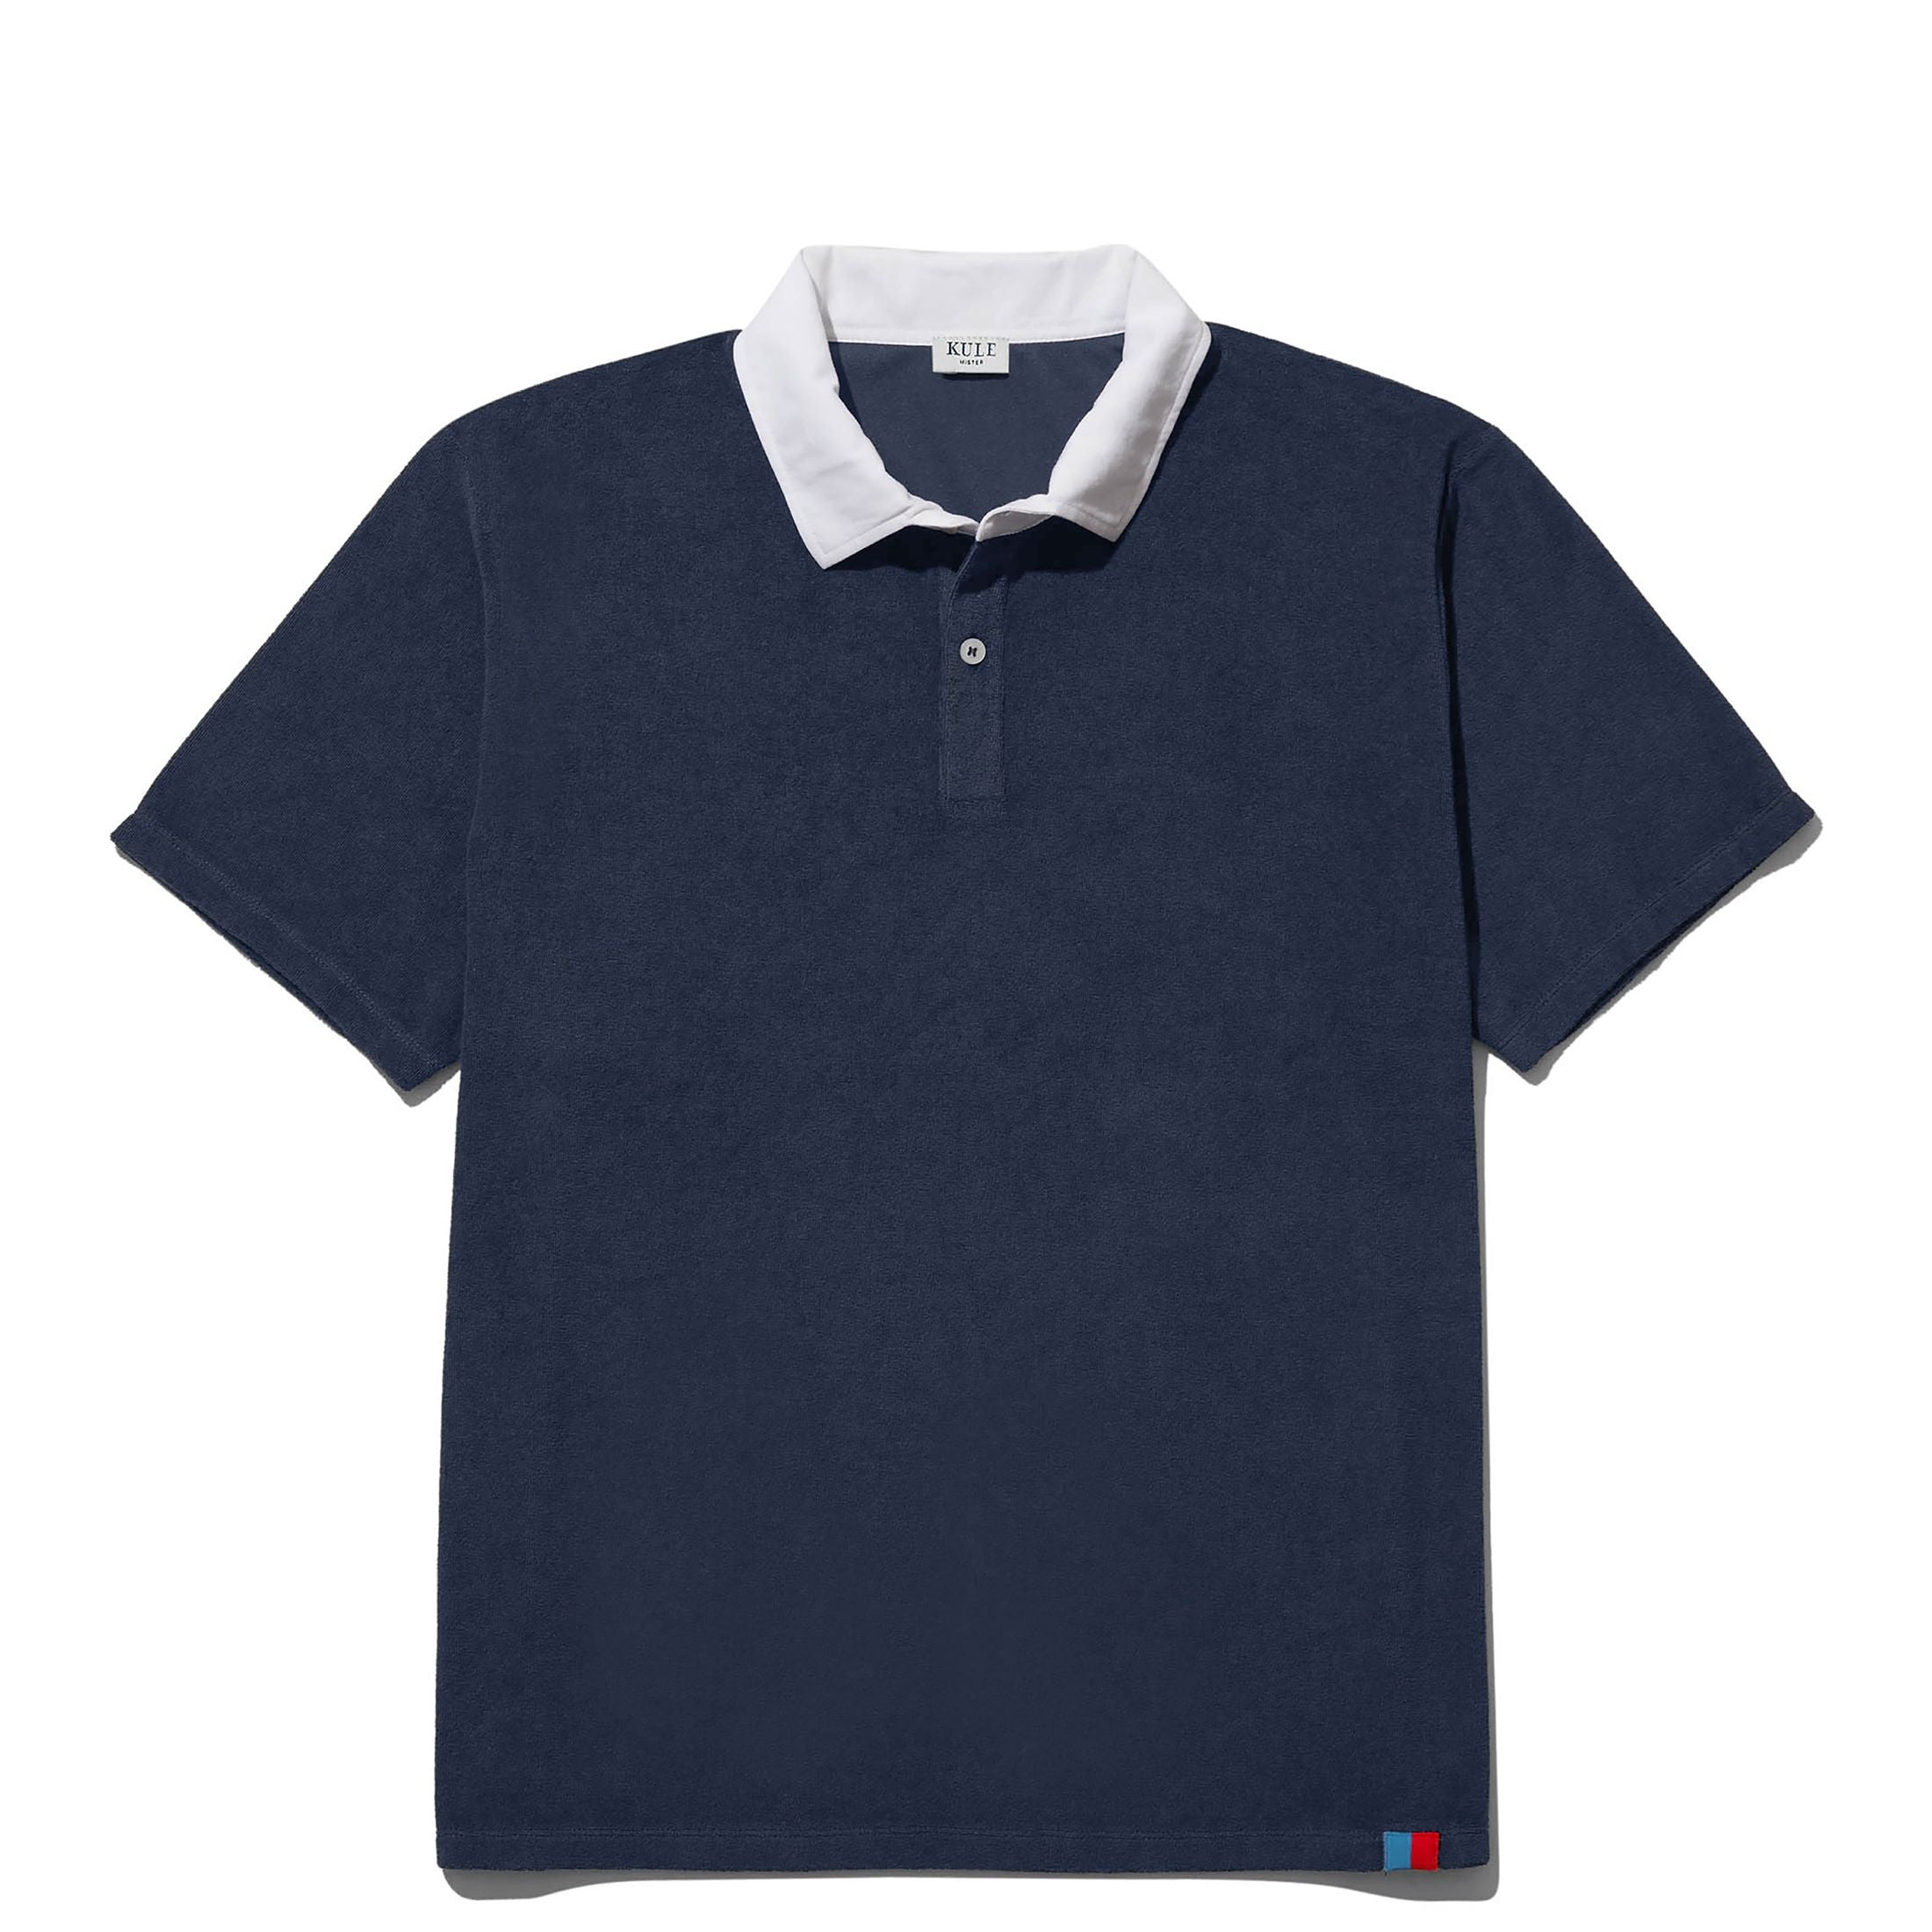 KULE - The Men's Terry Polo Size Chart